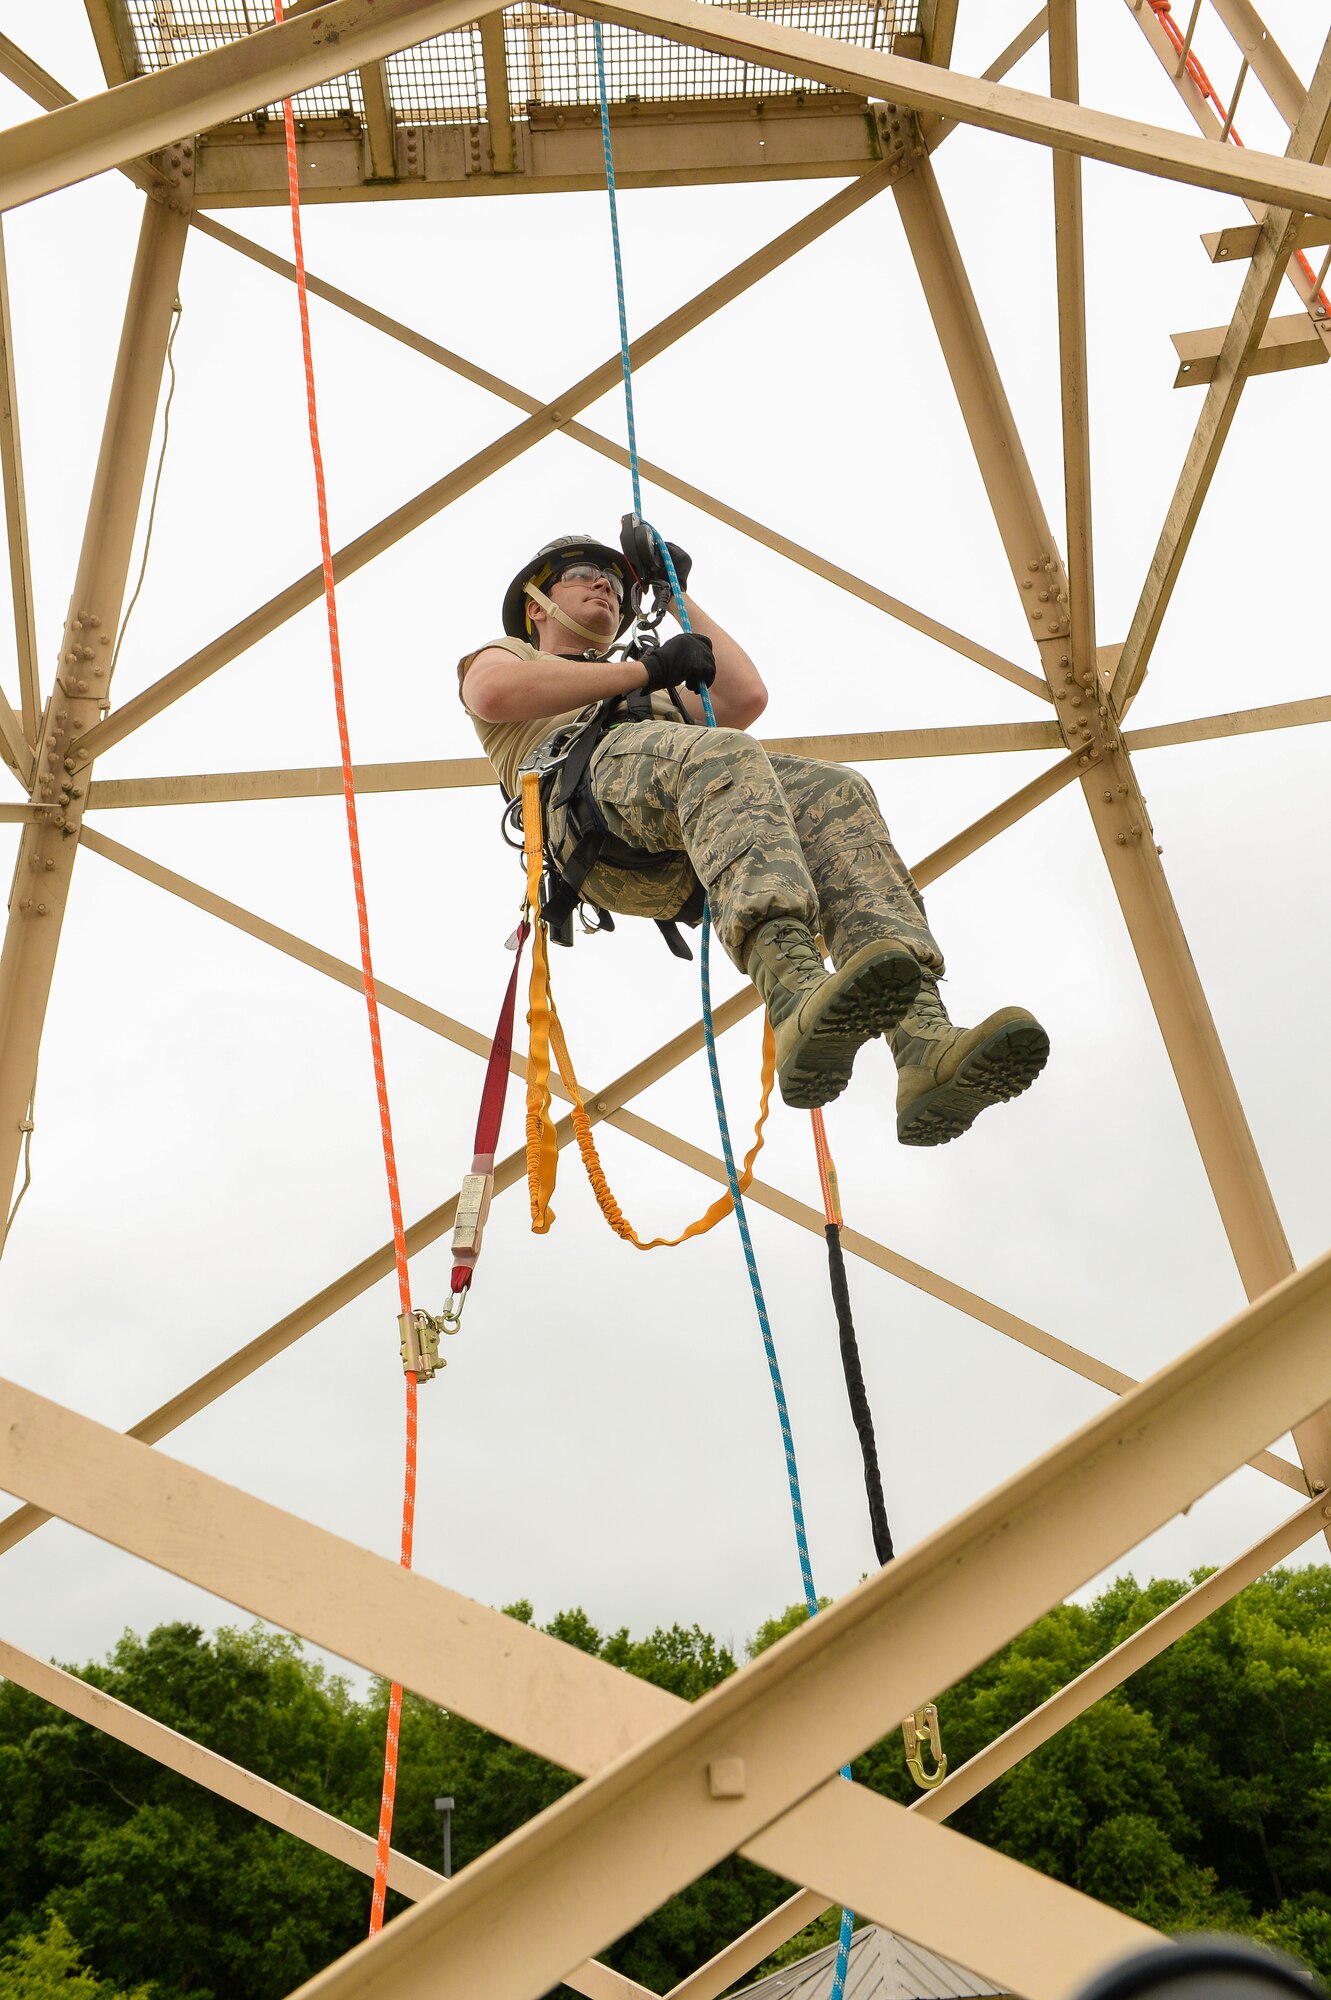 U.S. Air Force Airman 1st Class Justin Janes, an airfield systems apprentice with the 202nd Engineering Installation Squadron (EIS), Georgia Air National Guard, repels from a tower during a tower climbing and rescue training exercise being conducted during the unit’s annual training at Robins Air Force Base, Ga., June 10, 2015. The 202nd EIS’s enlisted and officer engineers, draftsmen, cable and electronics professionals design and install communications infrastructures. Some of their duties include building antennas, towers, fiber optics, and surveillance equipment, to access control and intrusion detection systems anywhere in the world. (U.S. Air National Guard photo by Senior Master Sgt. Roger Parsons/Released) 